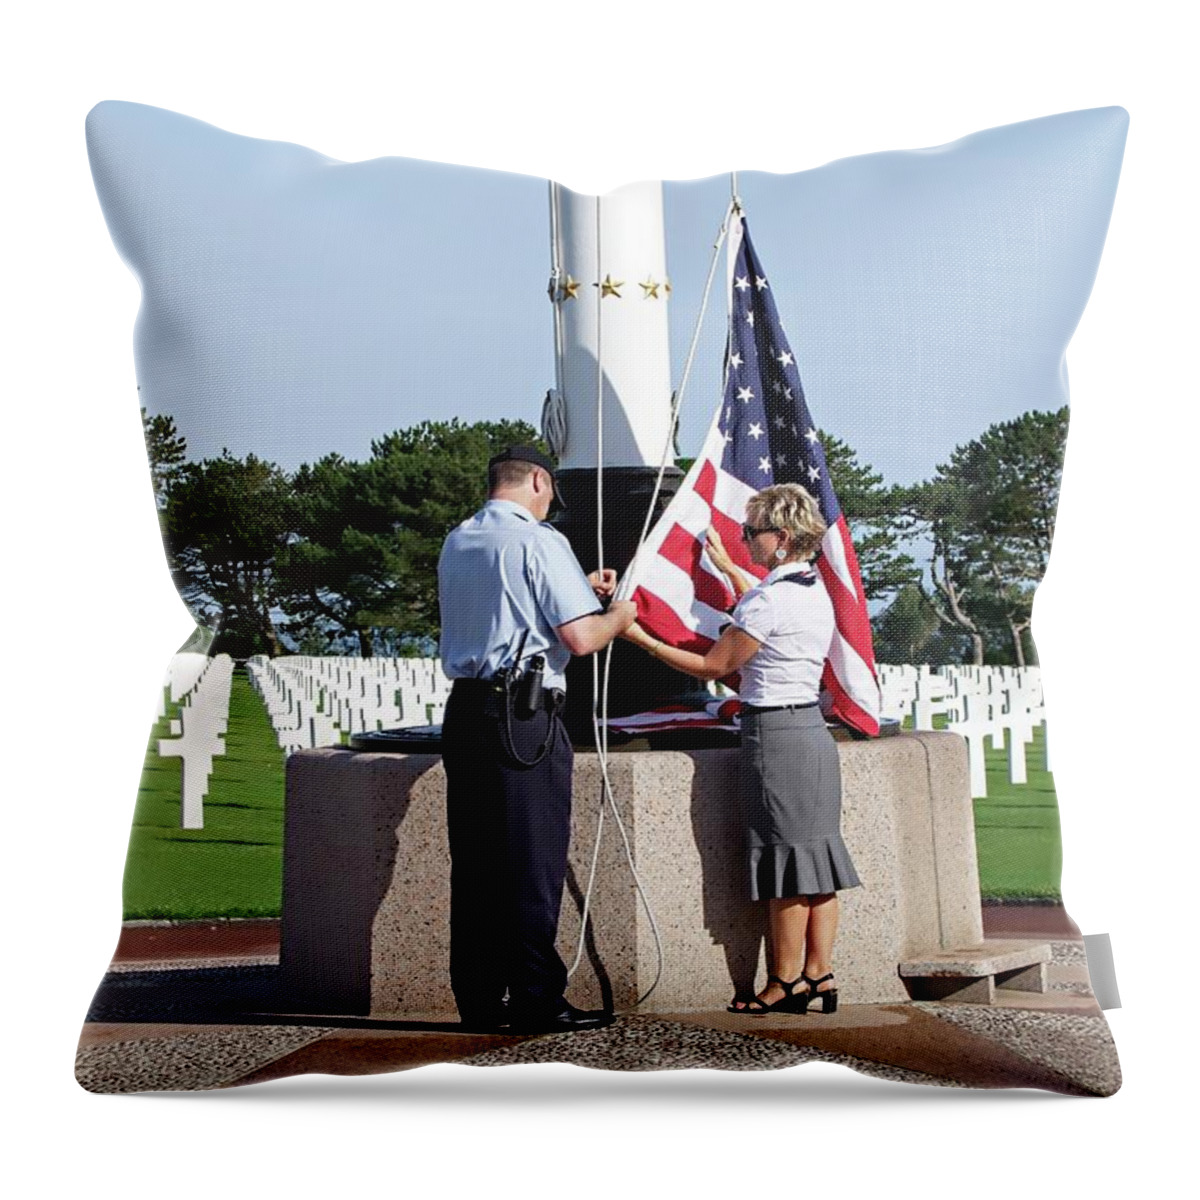 Europe Throw Pillow featuring the photograph Normandy - There Are No Words #2 by Joseph Hendrix